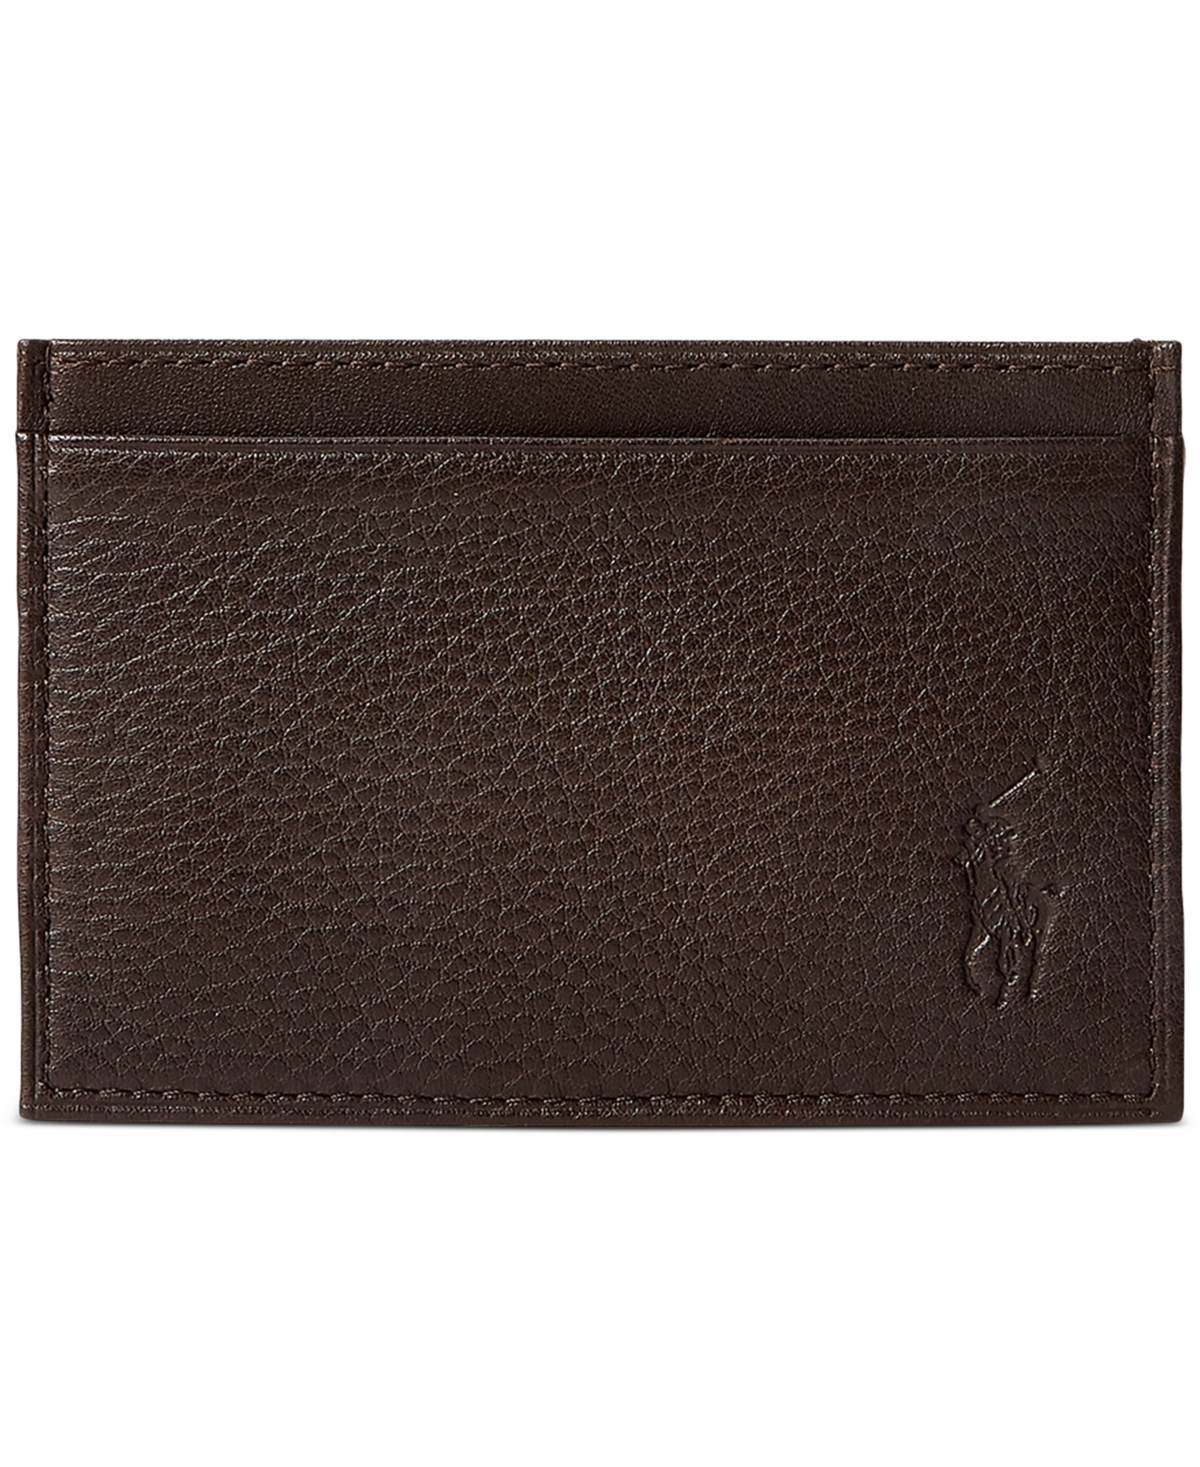 Polo Ralph Lauren Men's Pebbled Leather Card Case In Brown